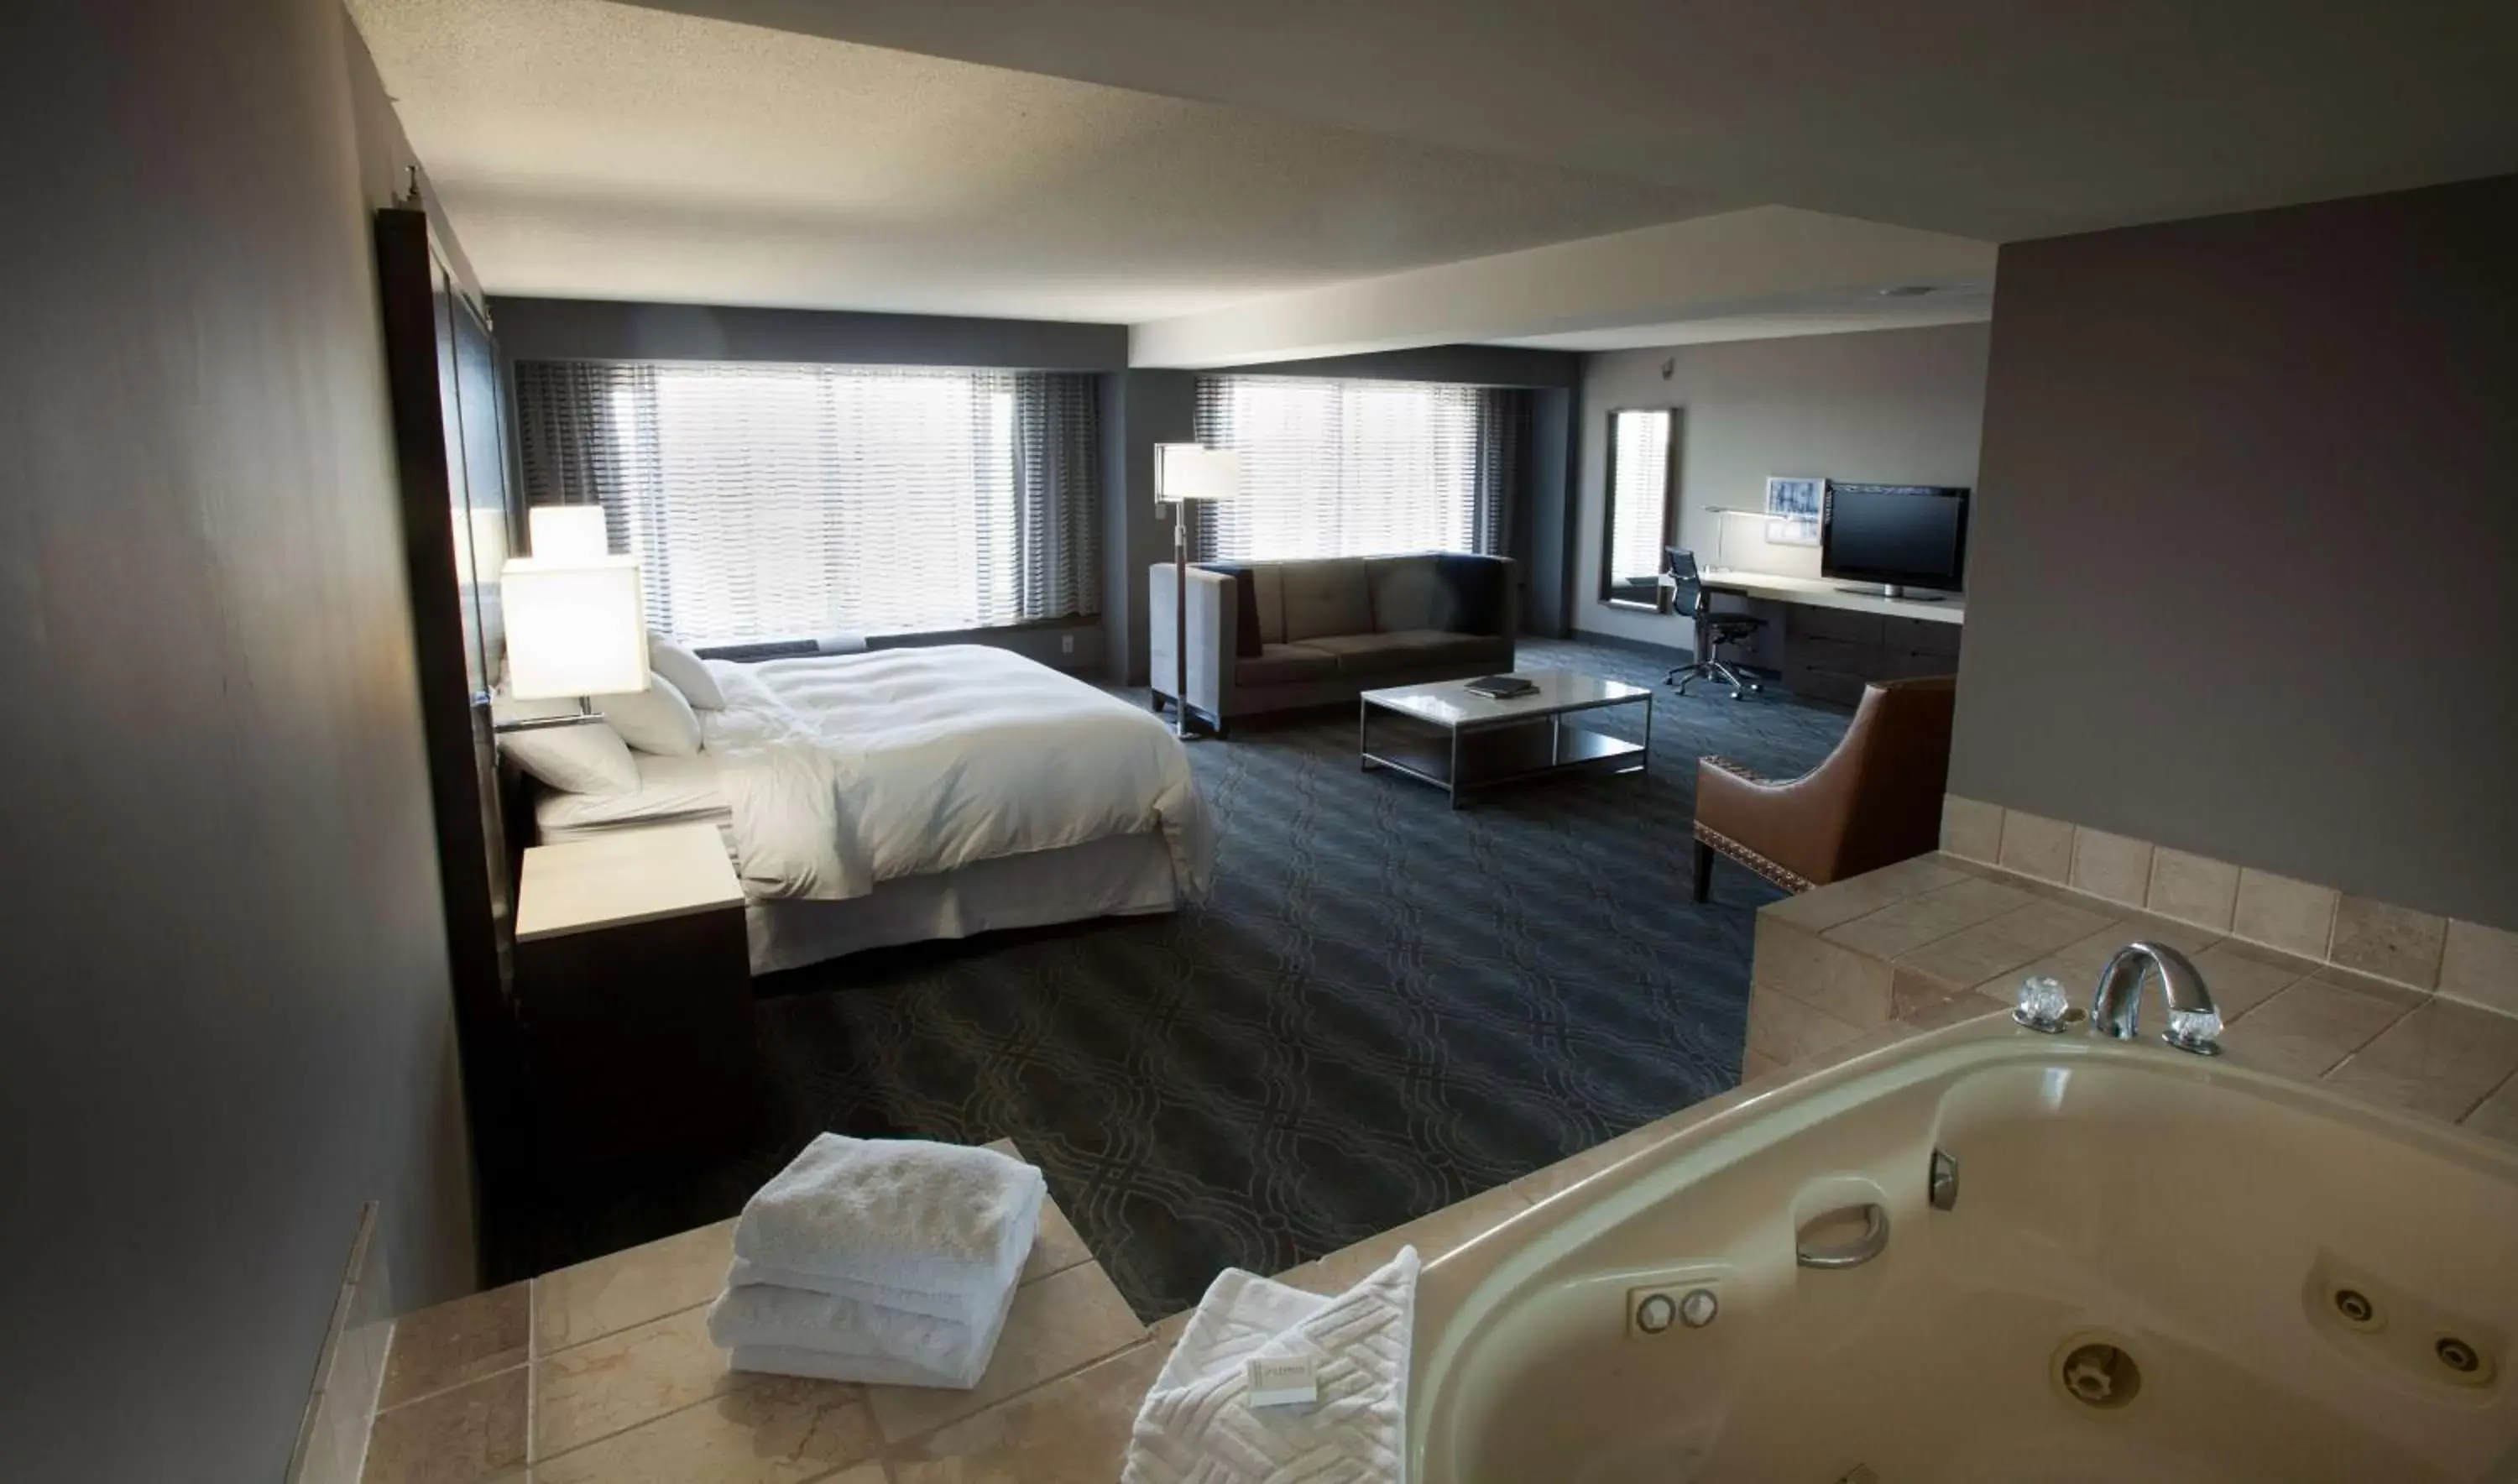 Bed in DoubleTree by Hilton Bloomington Minneapolis South